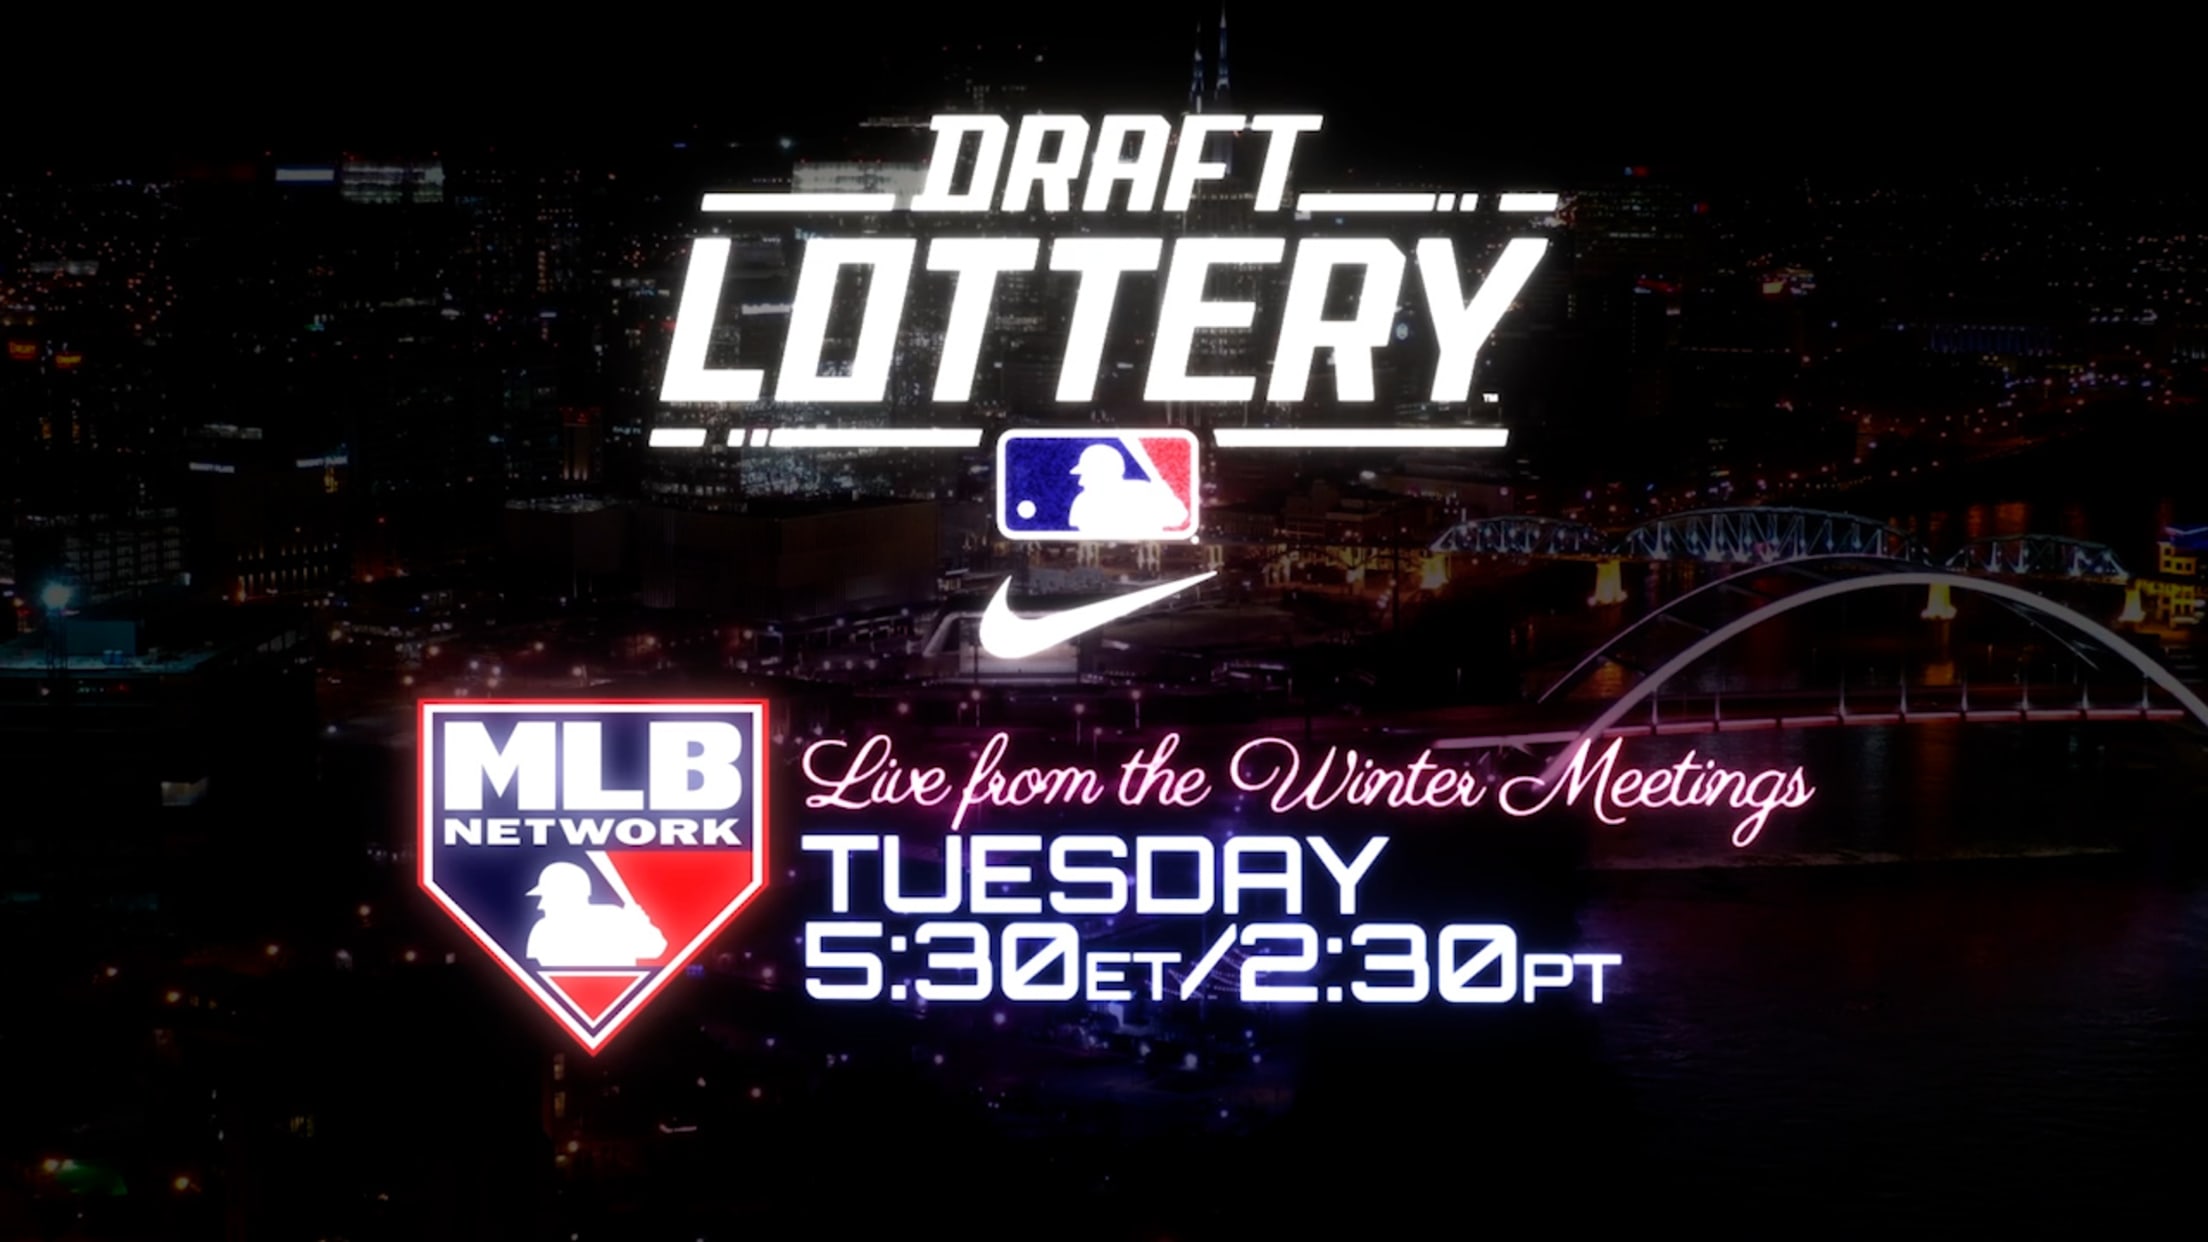 The Draft Lottery on MLB Network